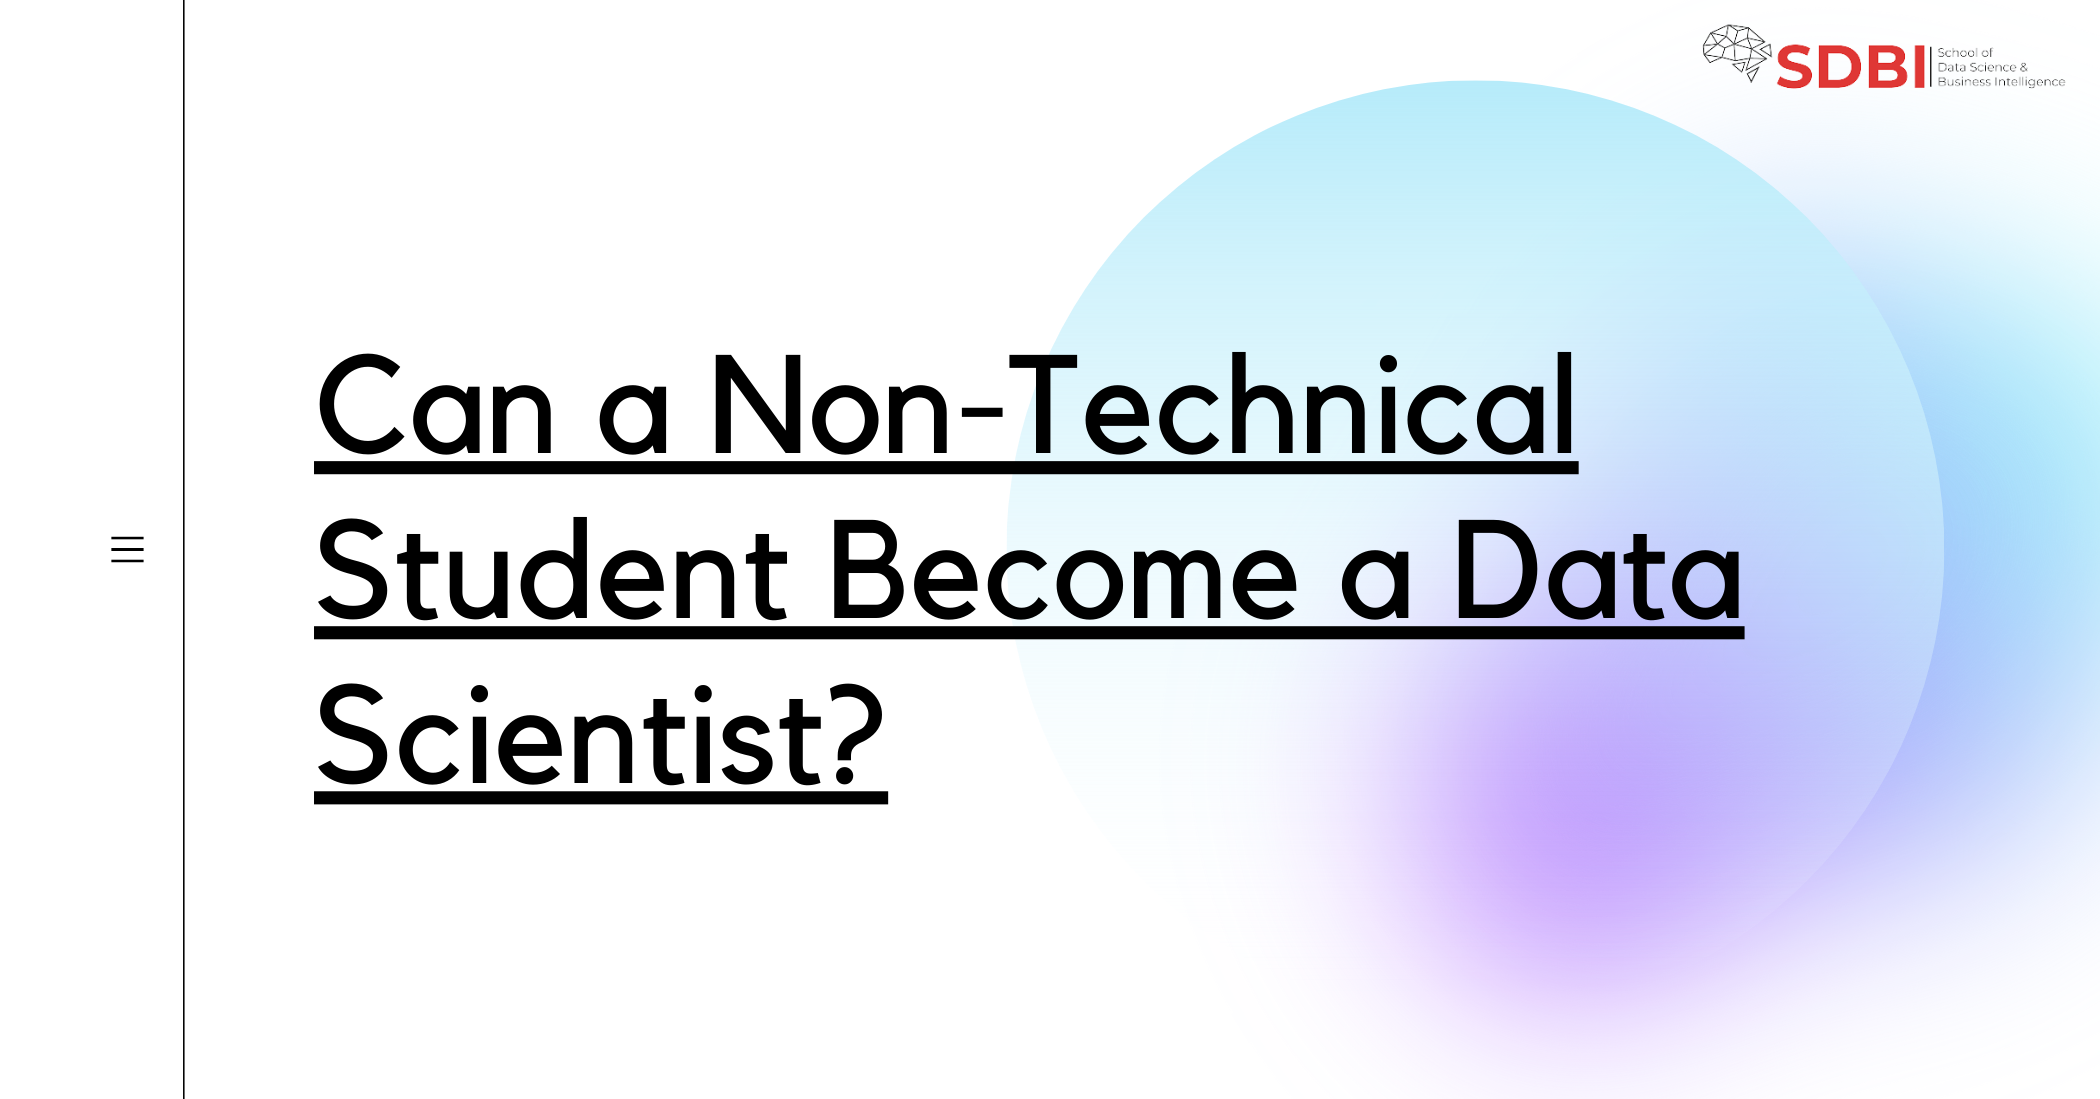 Non-Technical Students become a Data Scientist